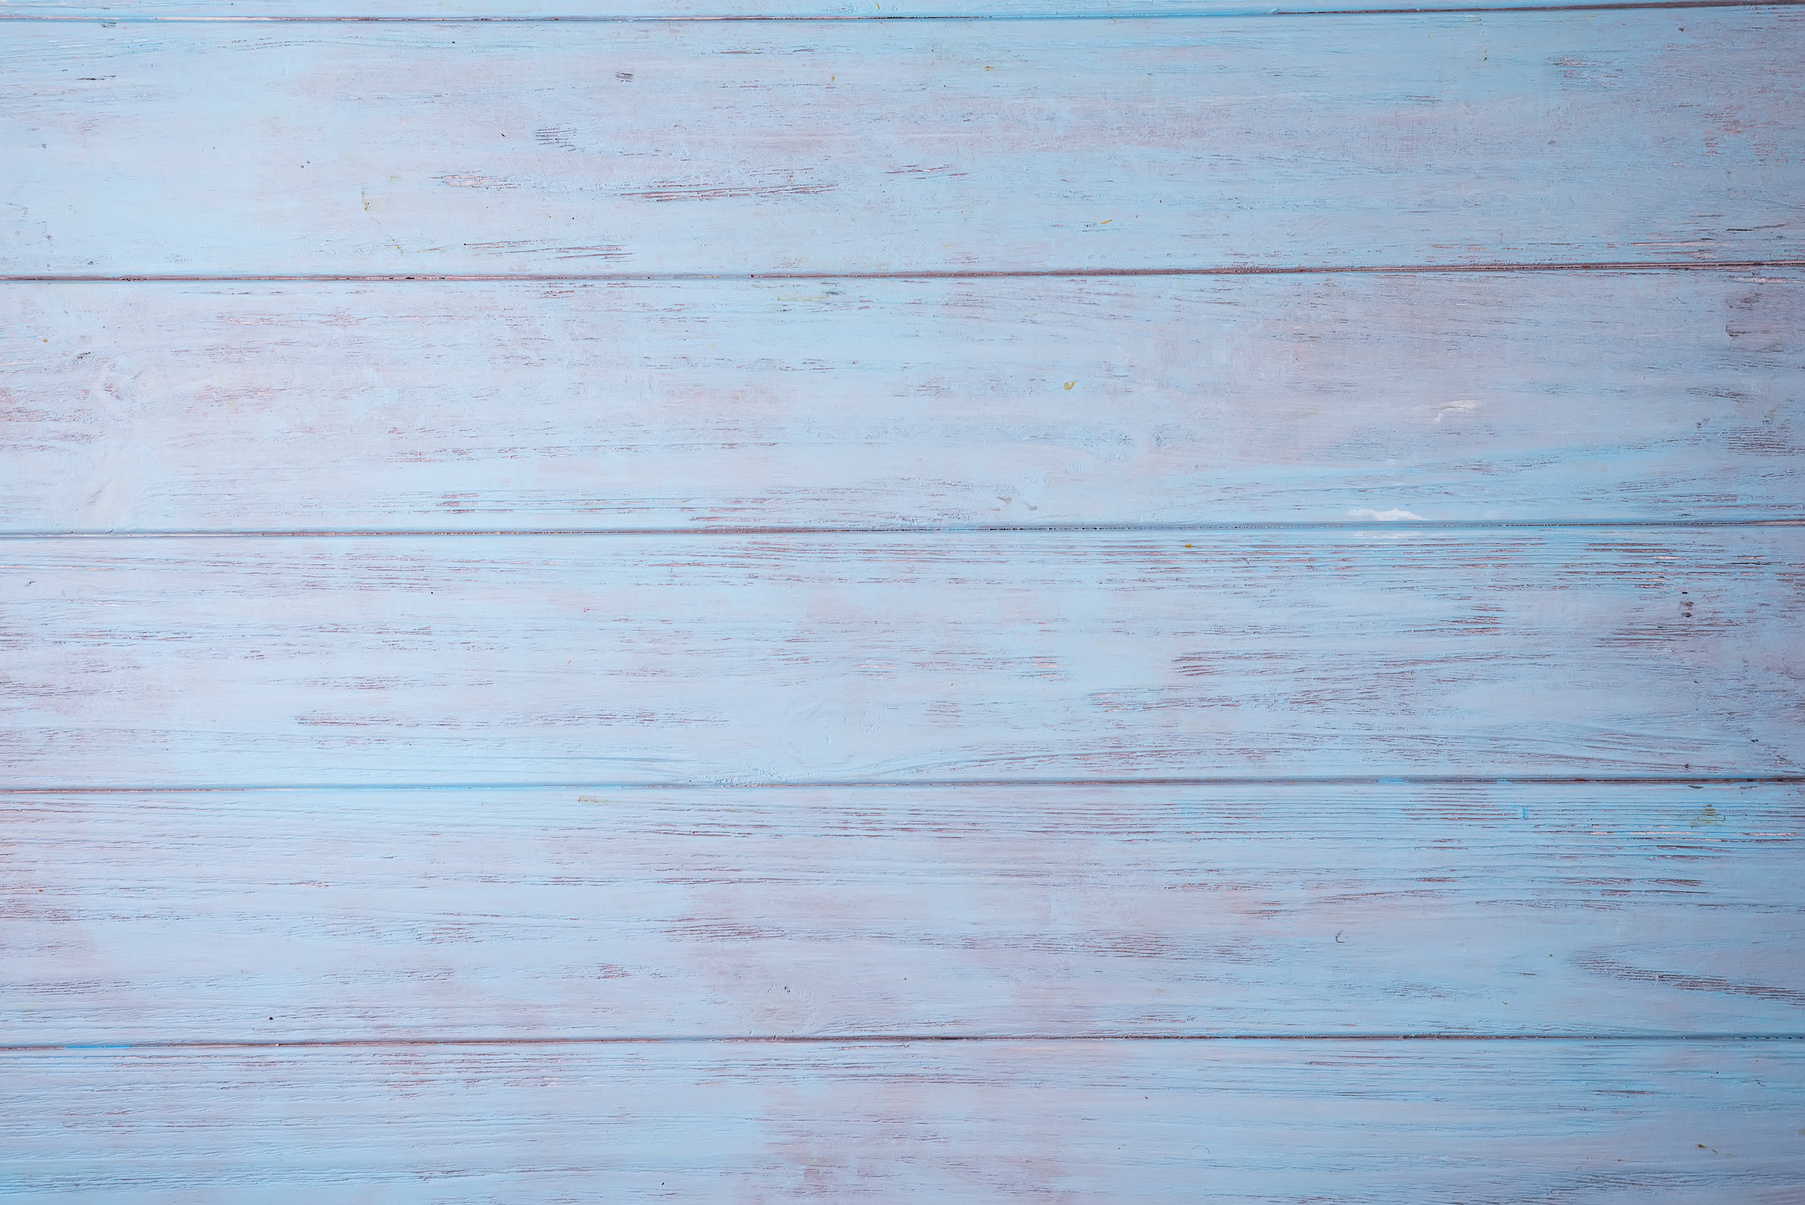 Painted Plain Teal Blue and Gray Rustic Wood Board Background That Can Be Either Horizontal or Vertical.